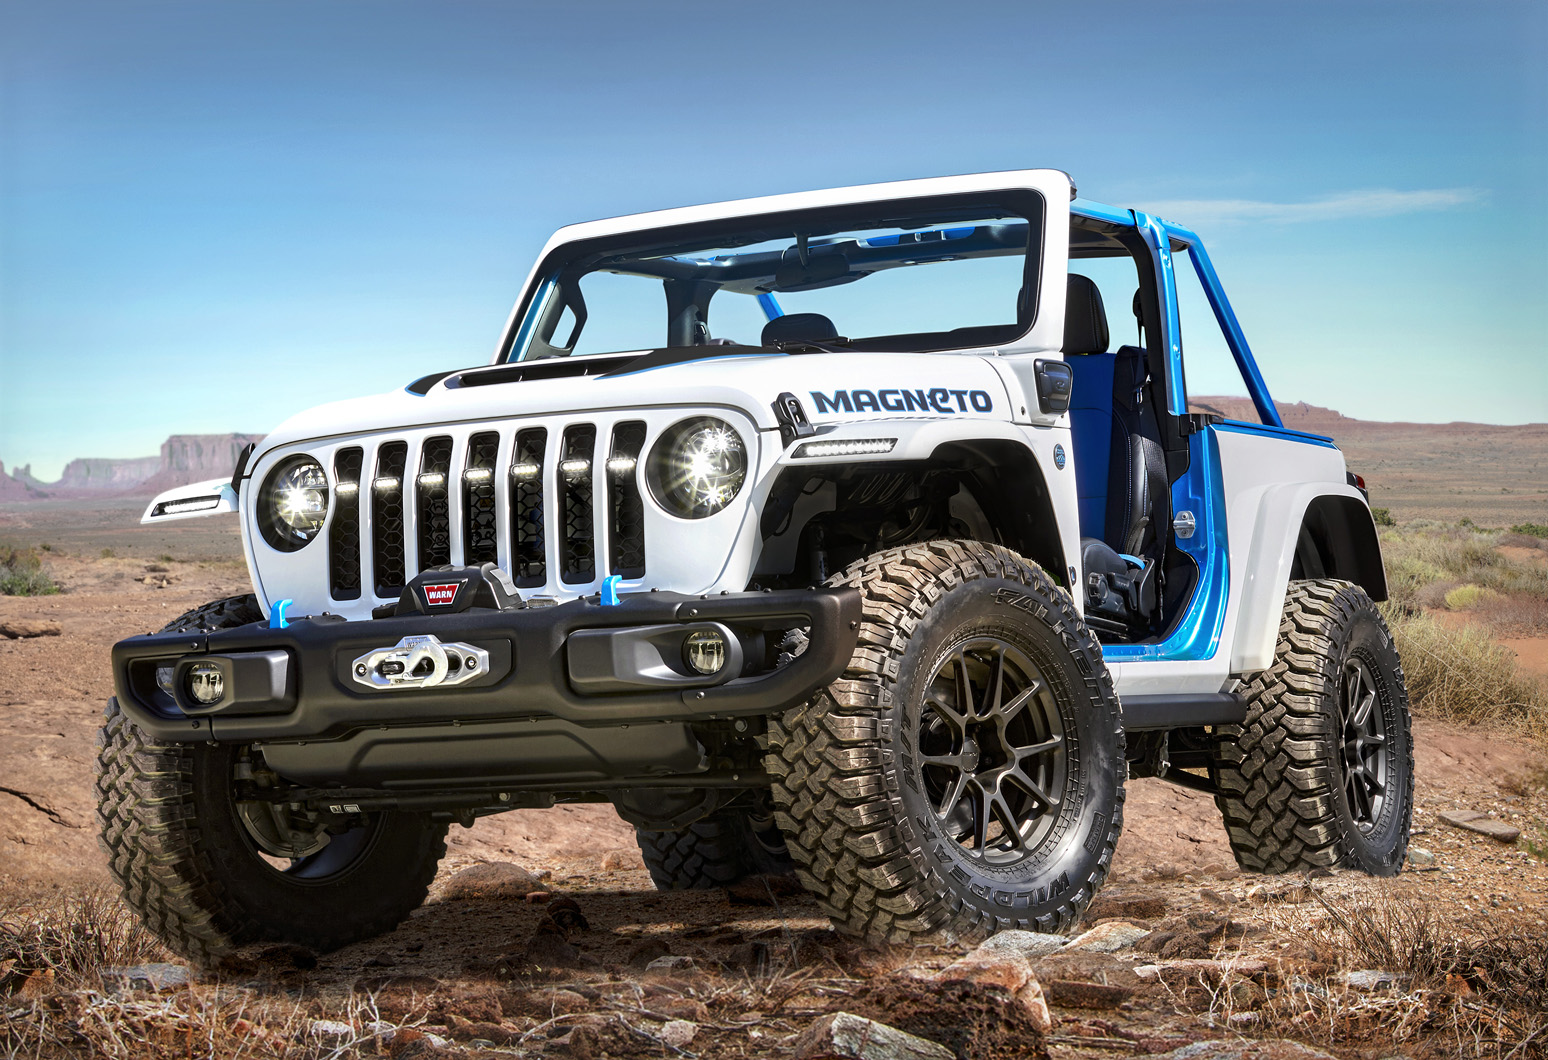 Jeep previews electric Wrangler with six-speed Magneto concept | Autocar